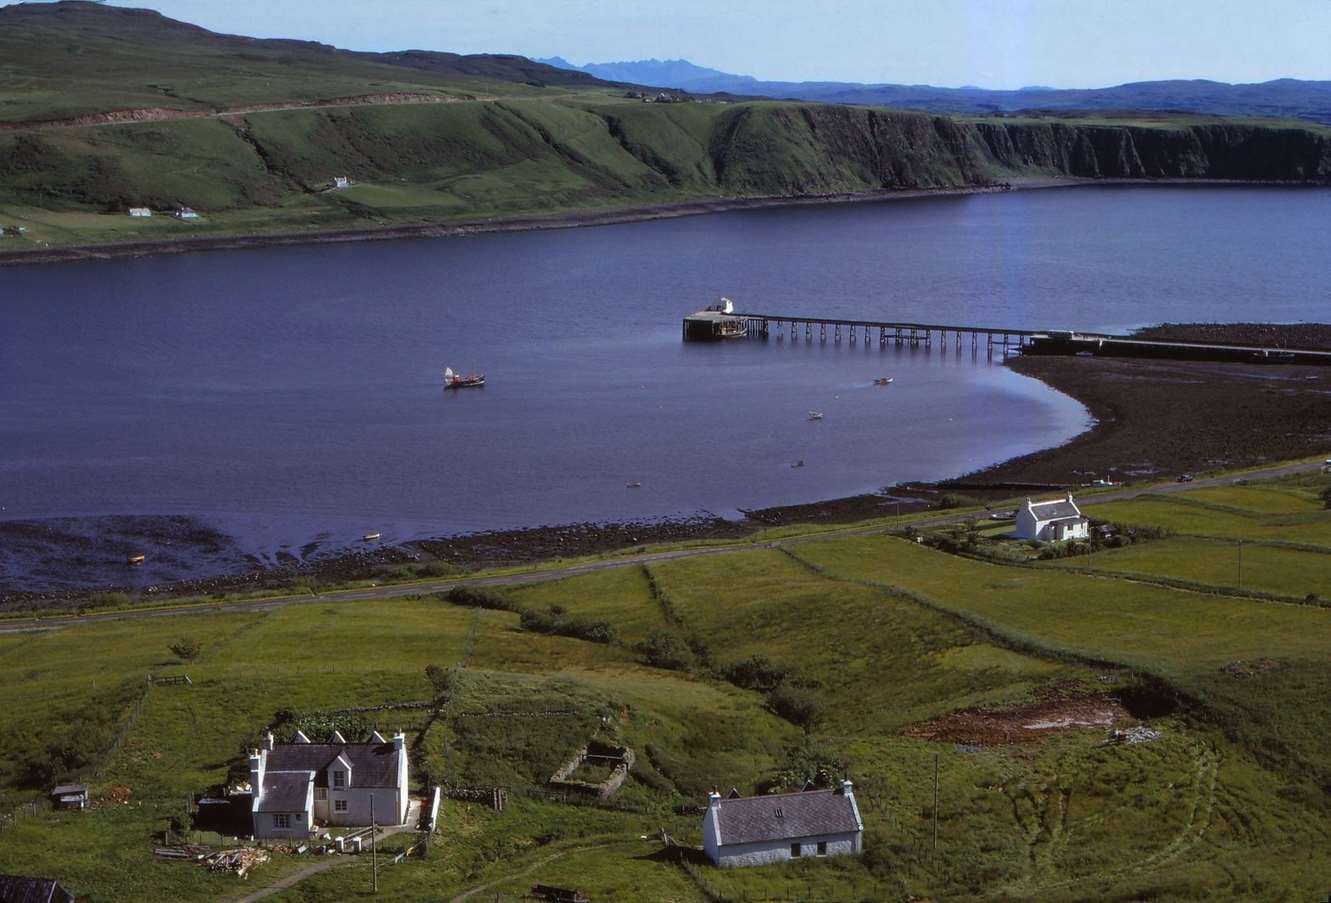 Village of Uig, and Jetty for ferry to outer Hebrides, Isle of Skye, Scotland, 1960s